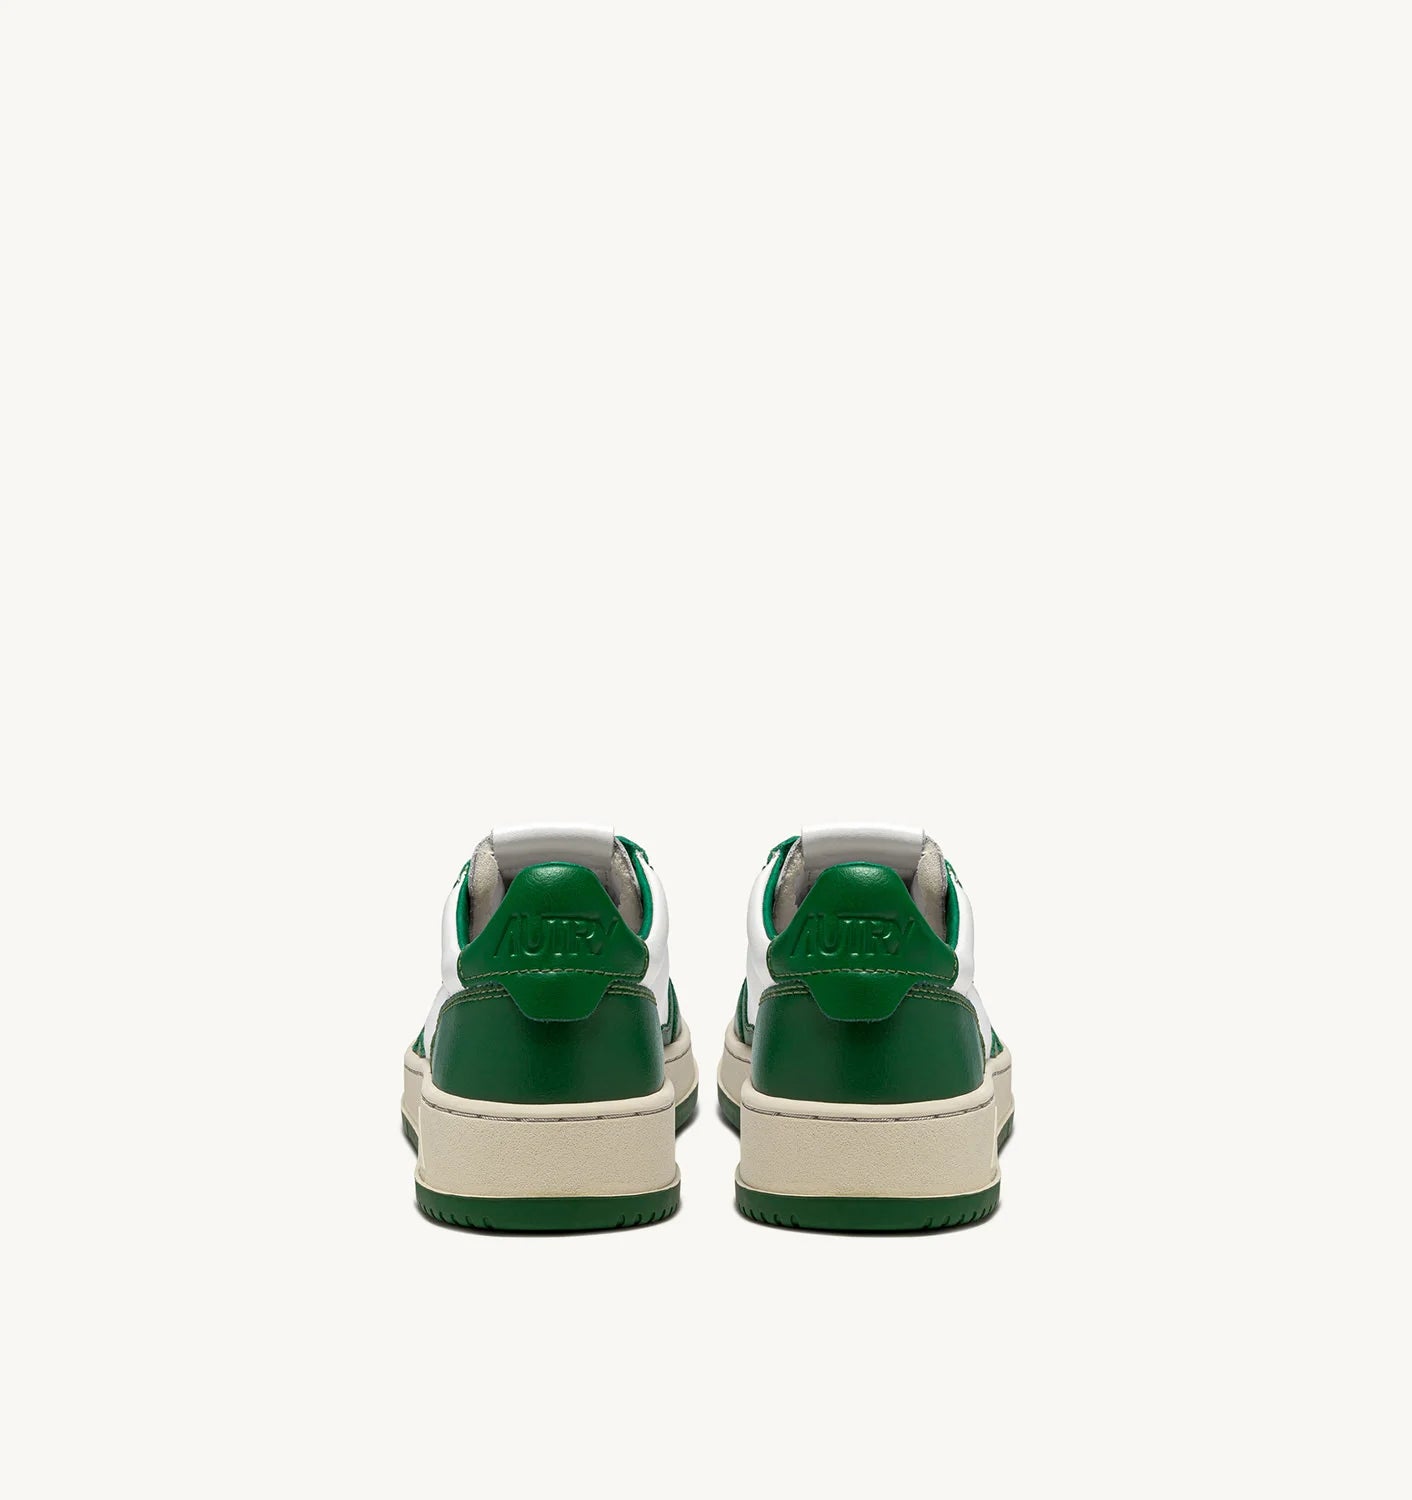 Autry WB03 White Green Bicolor Sneakers